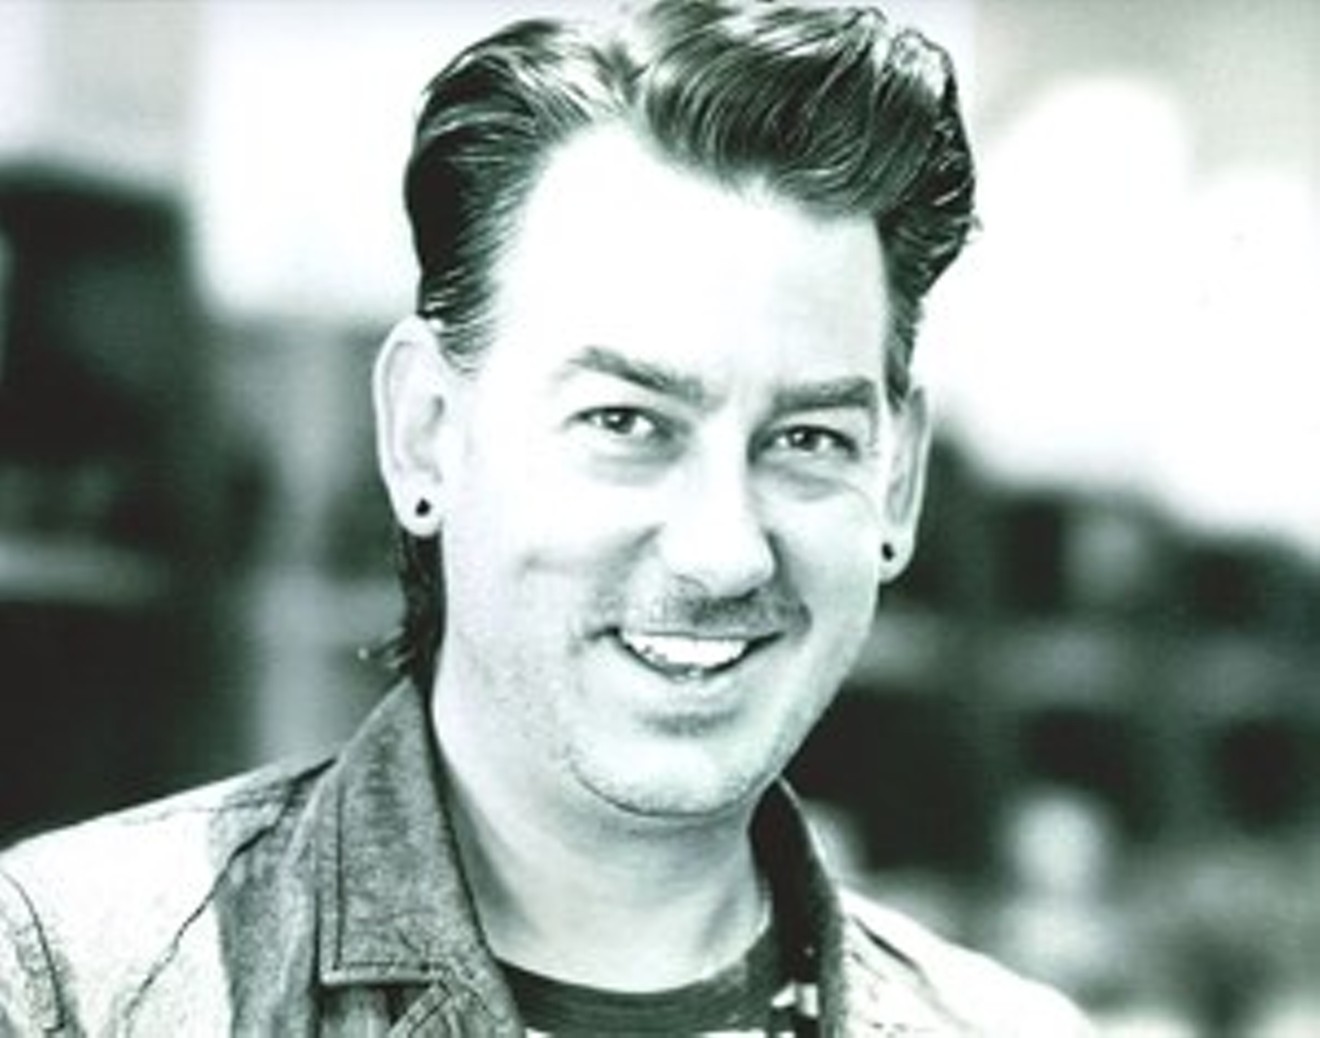 James Sharp was an influential, beloved member of Denver's music scene, beginning in the mid-’90s.